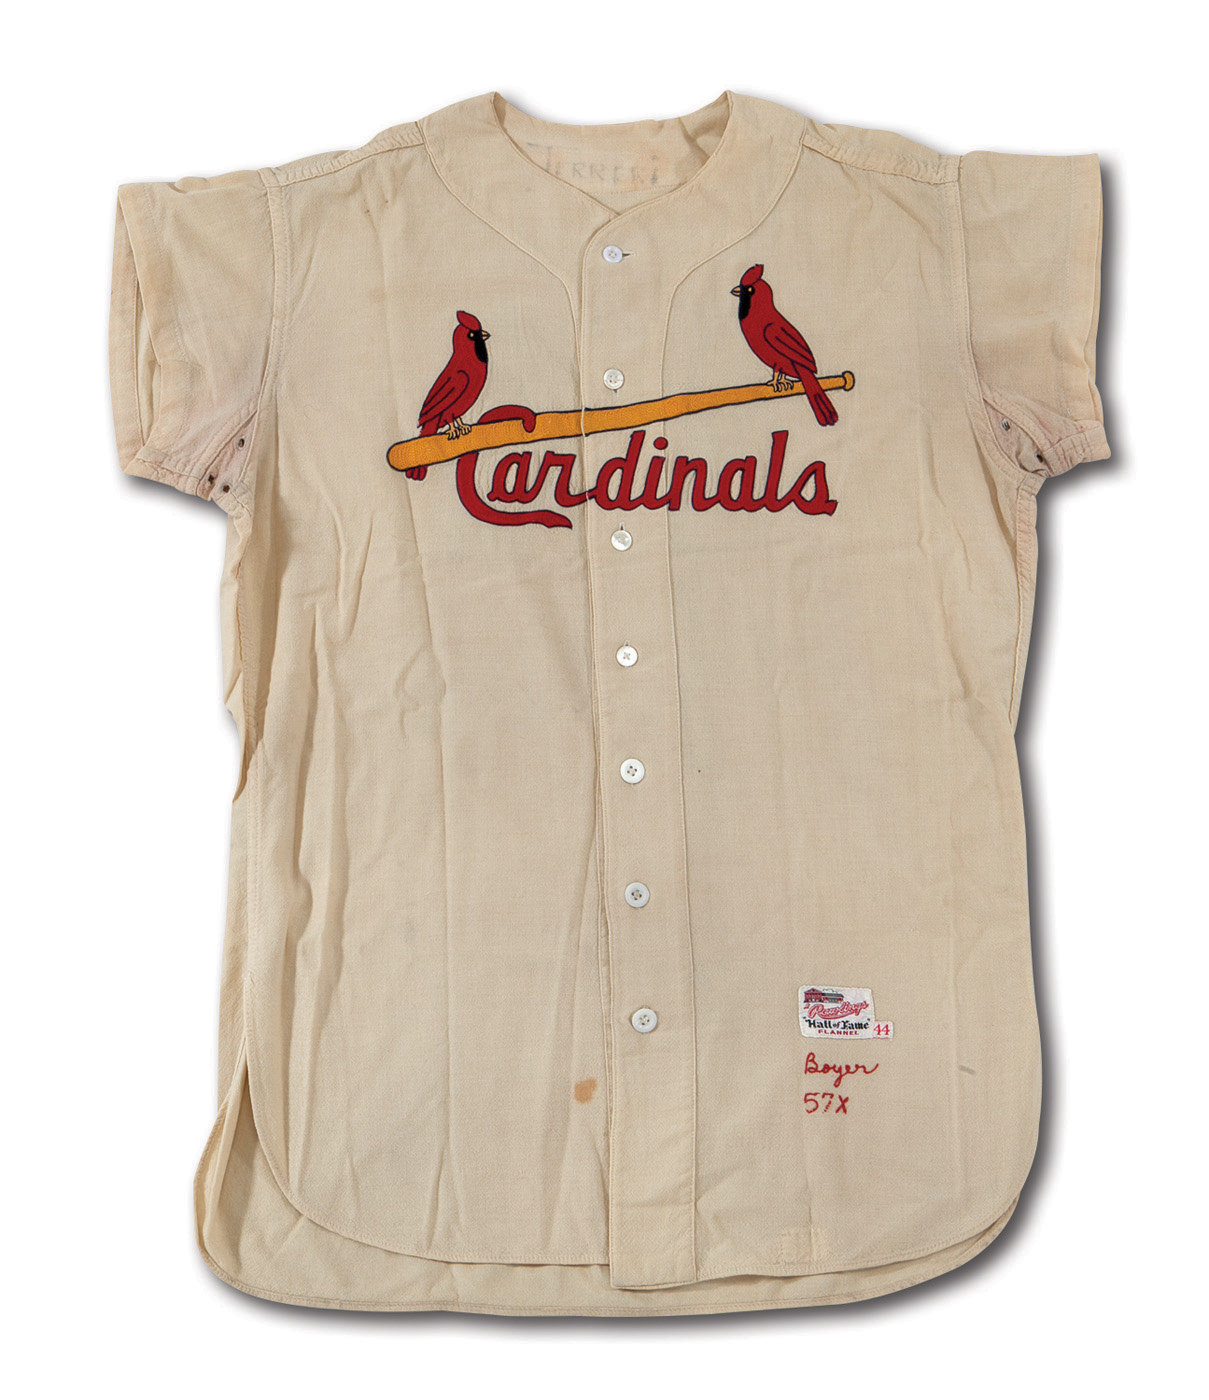 st louis cardinals game used